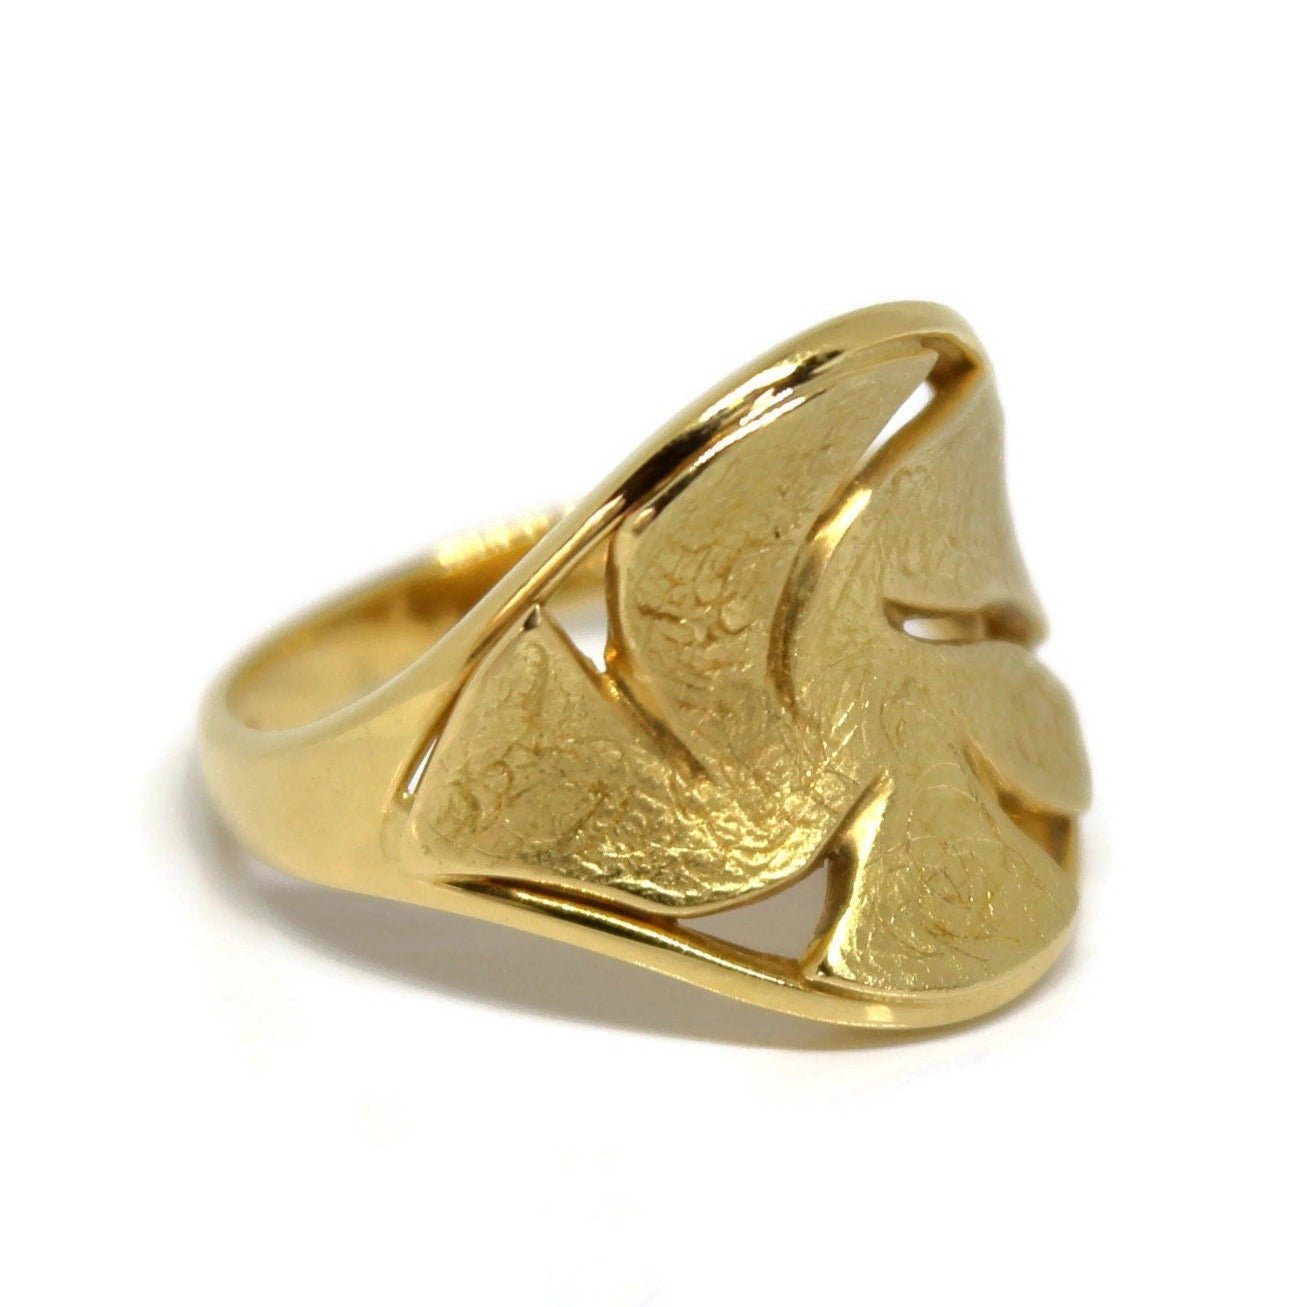 18k Yellow Gold Ring, the top has a matte finish surrounded by brilliant shiny gold - R. Mouzannar Jewelry